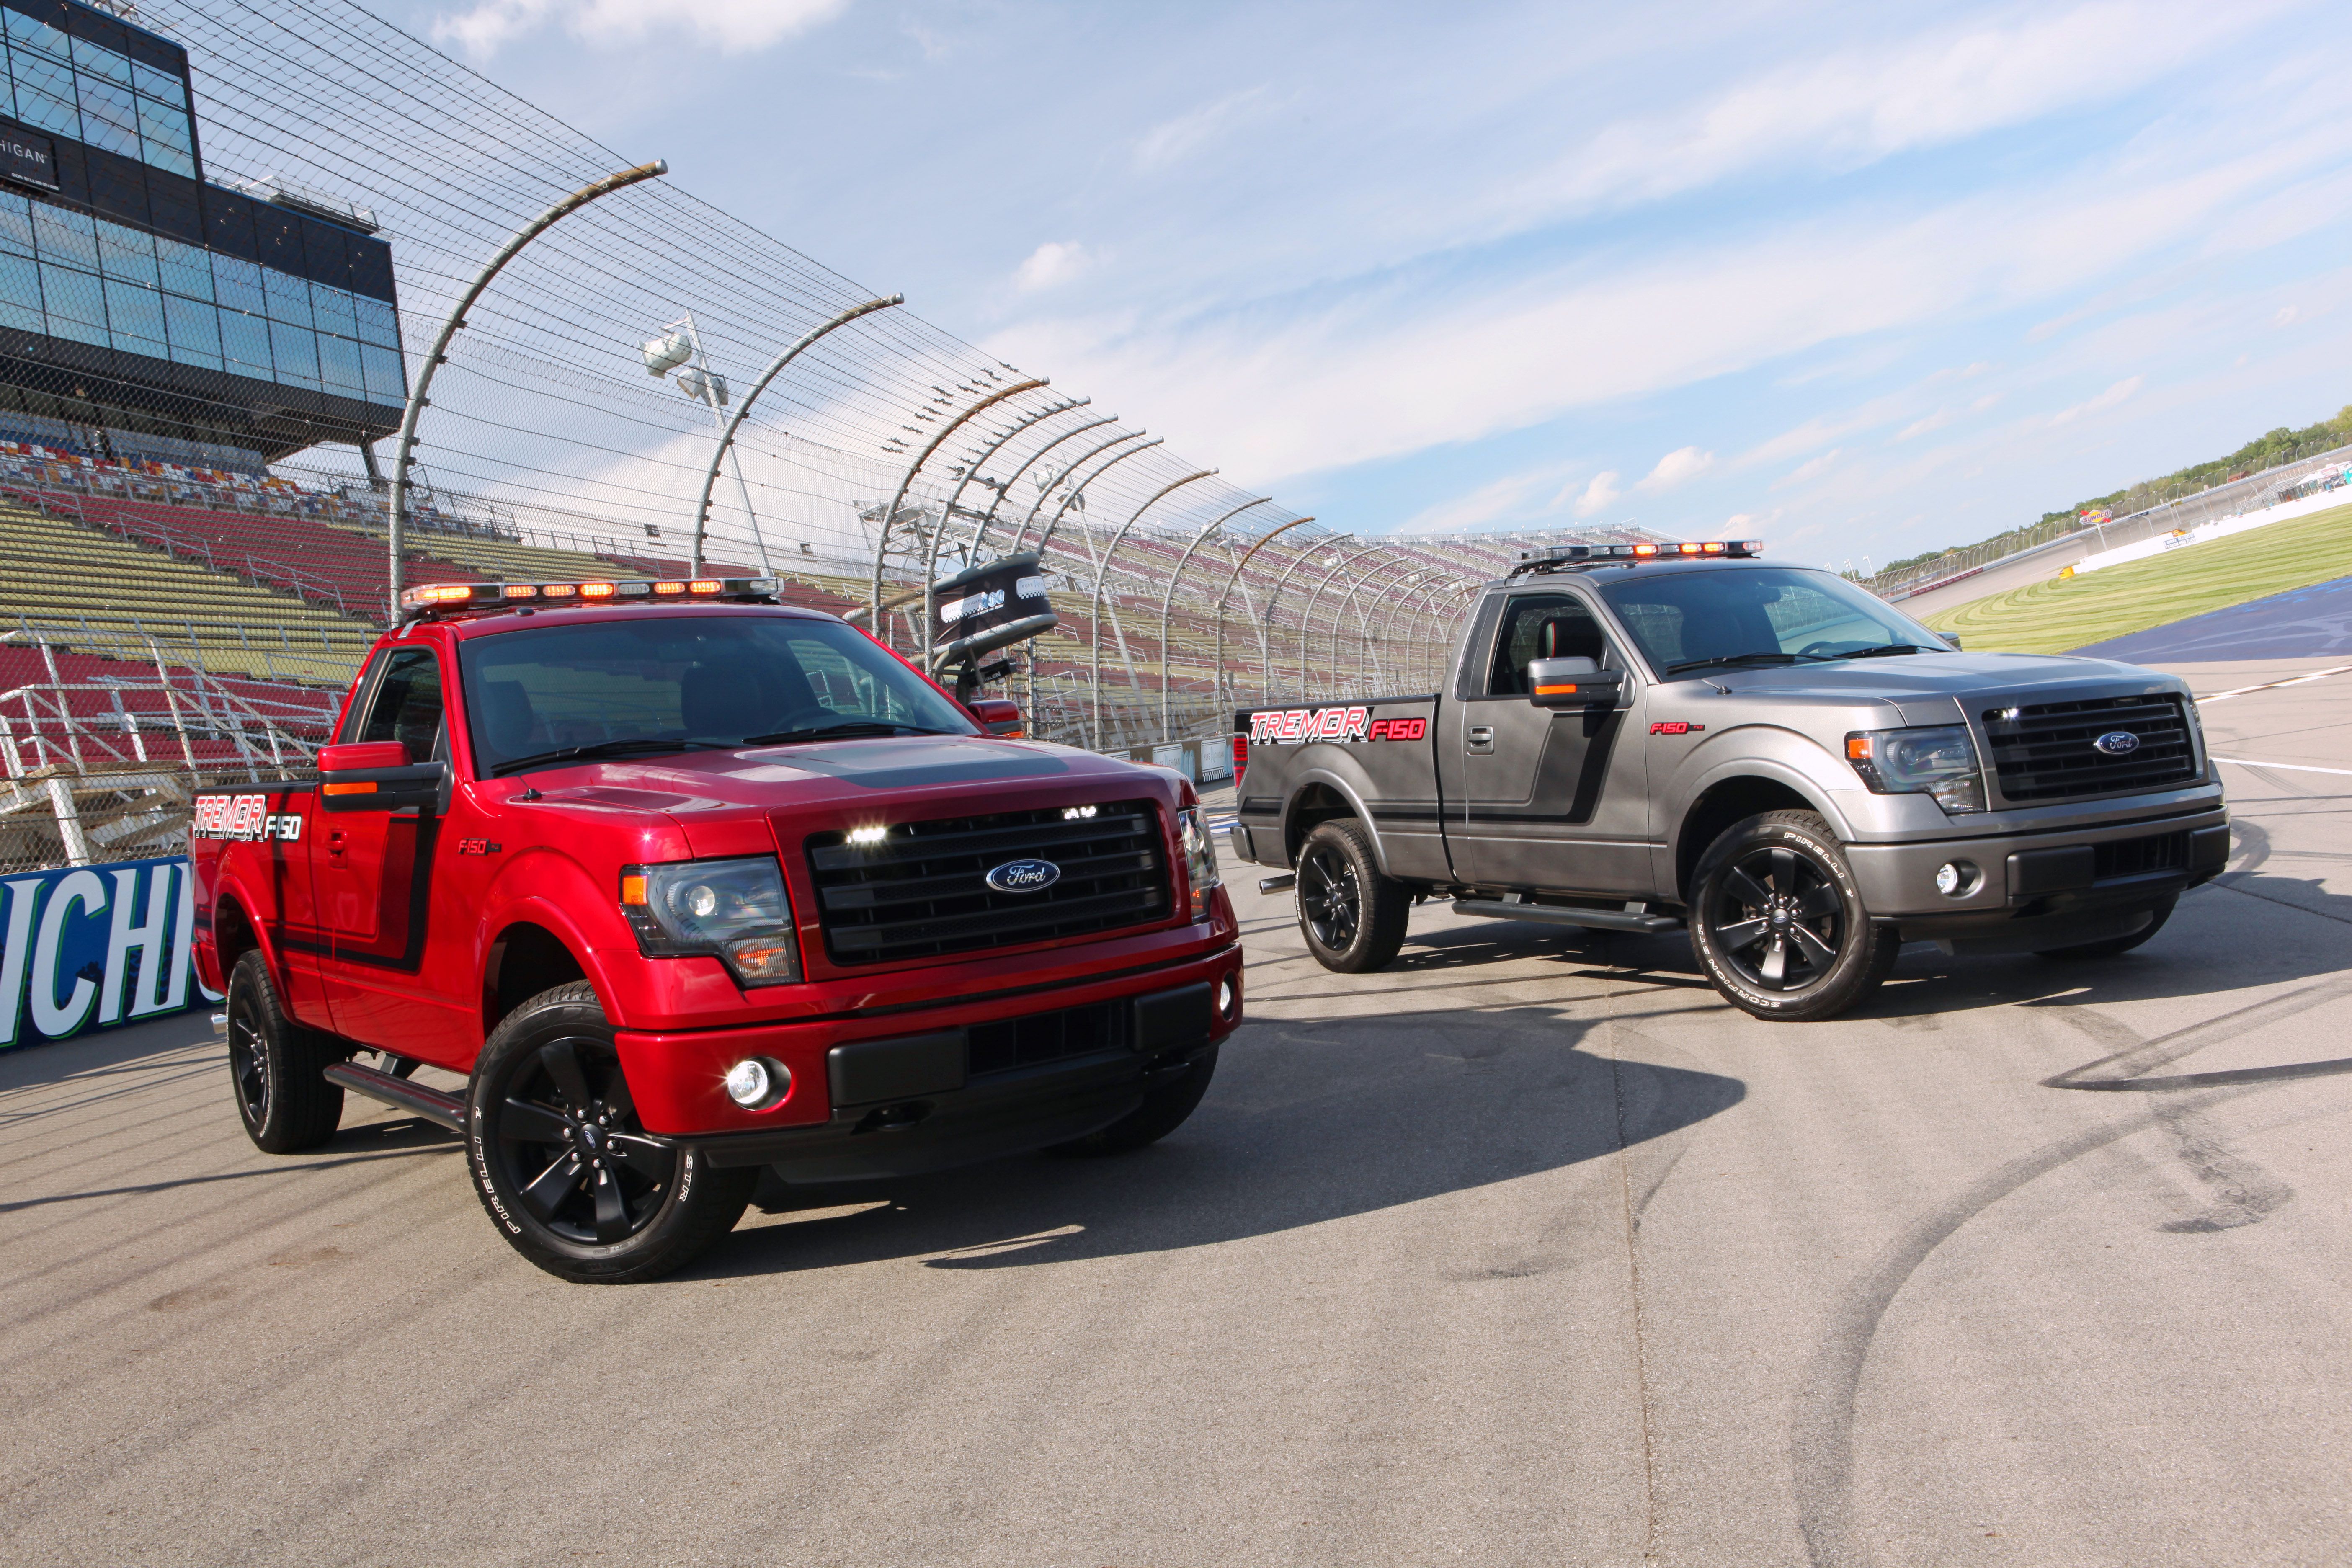 2014 Ford F-150 Tremor Pace Truck